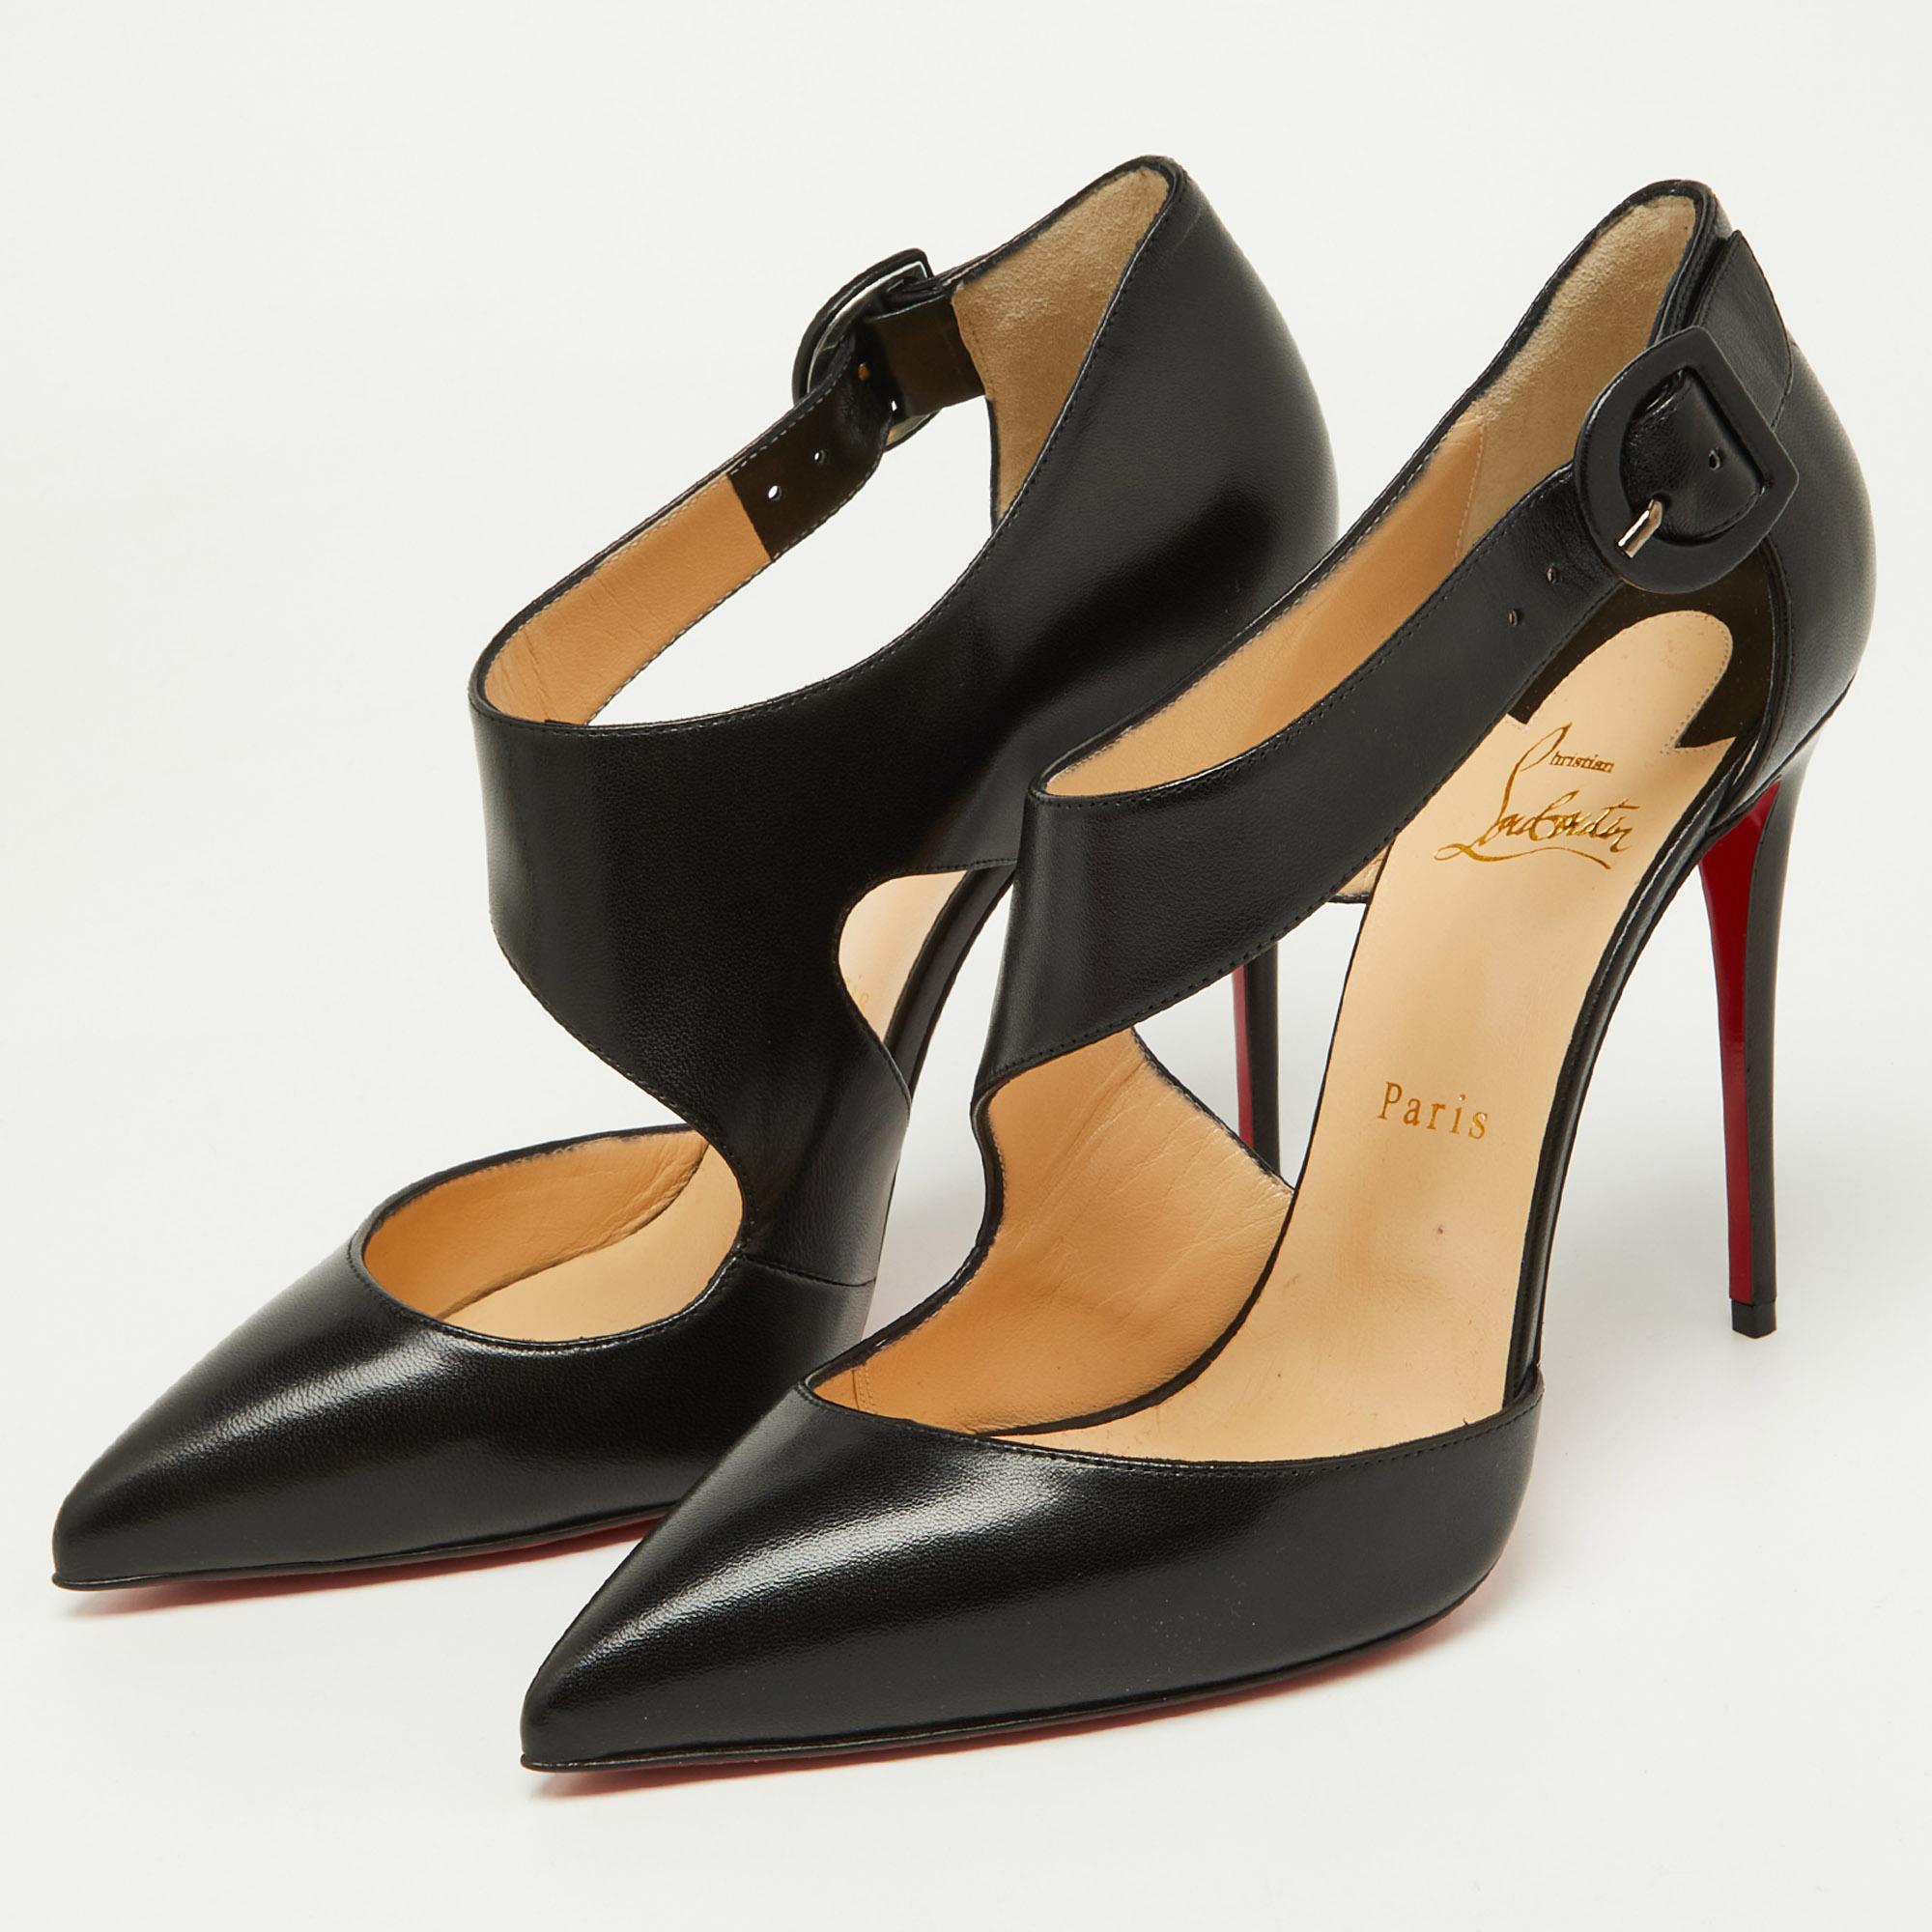 The modern, chic look is possible with this pair of leather Sharpeta pumps. Designed to perfection, these pumps are from a luxury house known for its exclusive and glamorous shoes — Christian Louboutin. They come with pointed toes, stiletto heels,